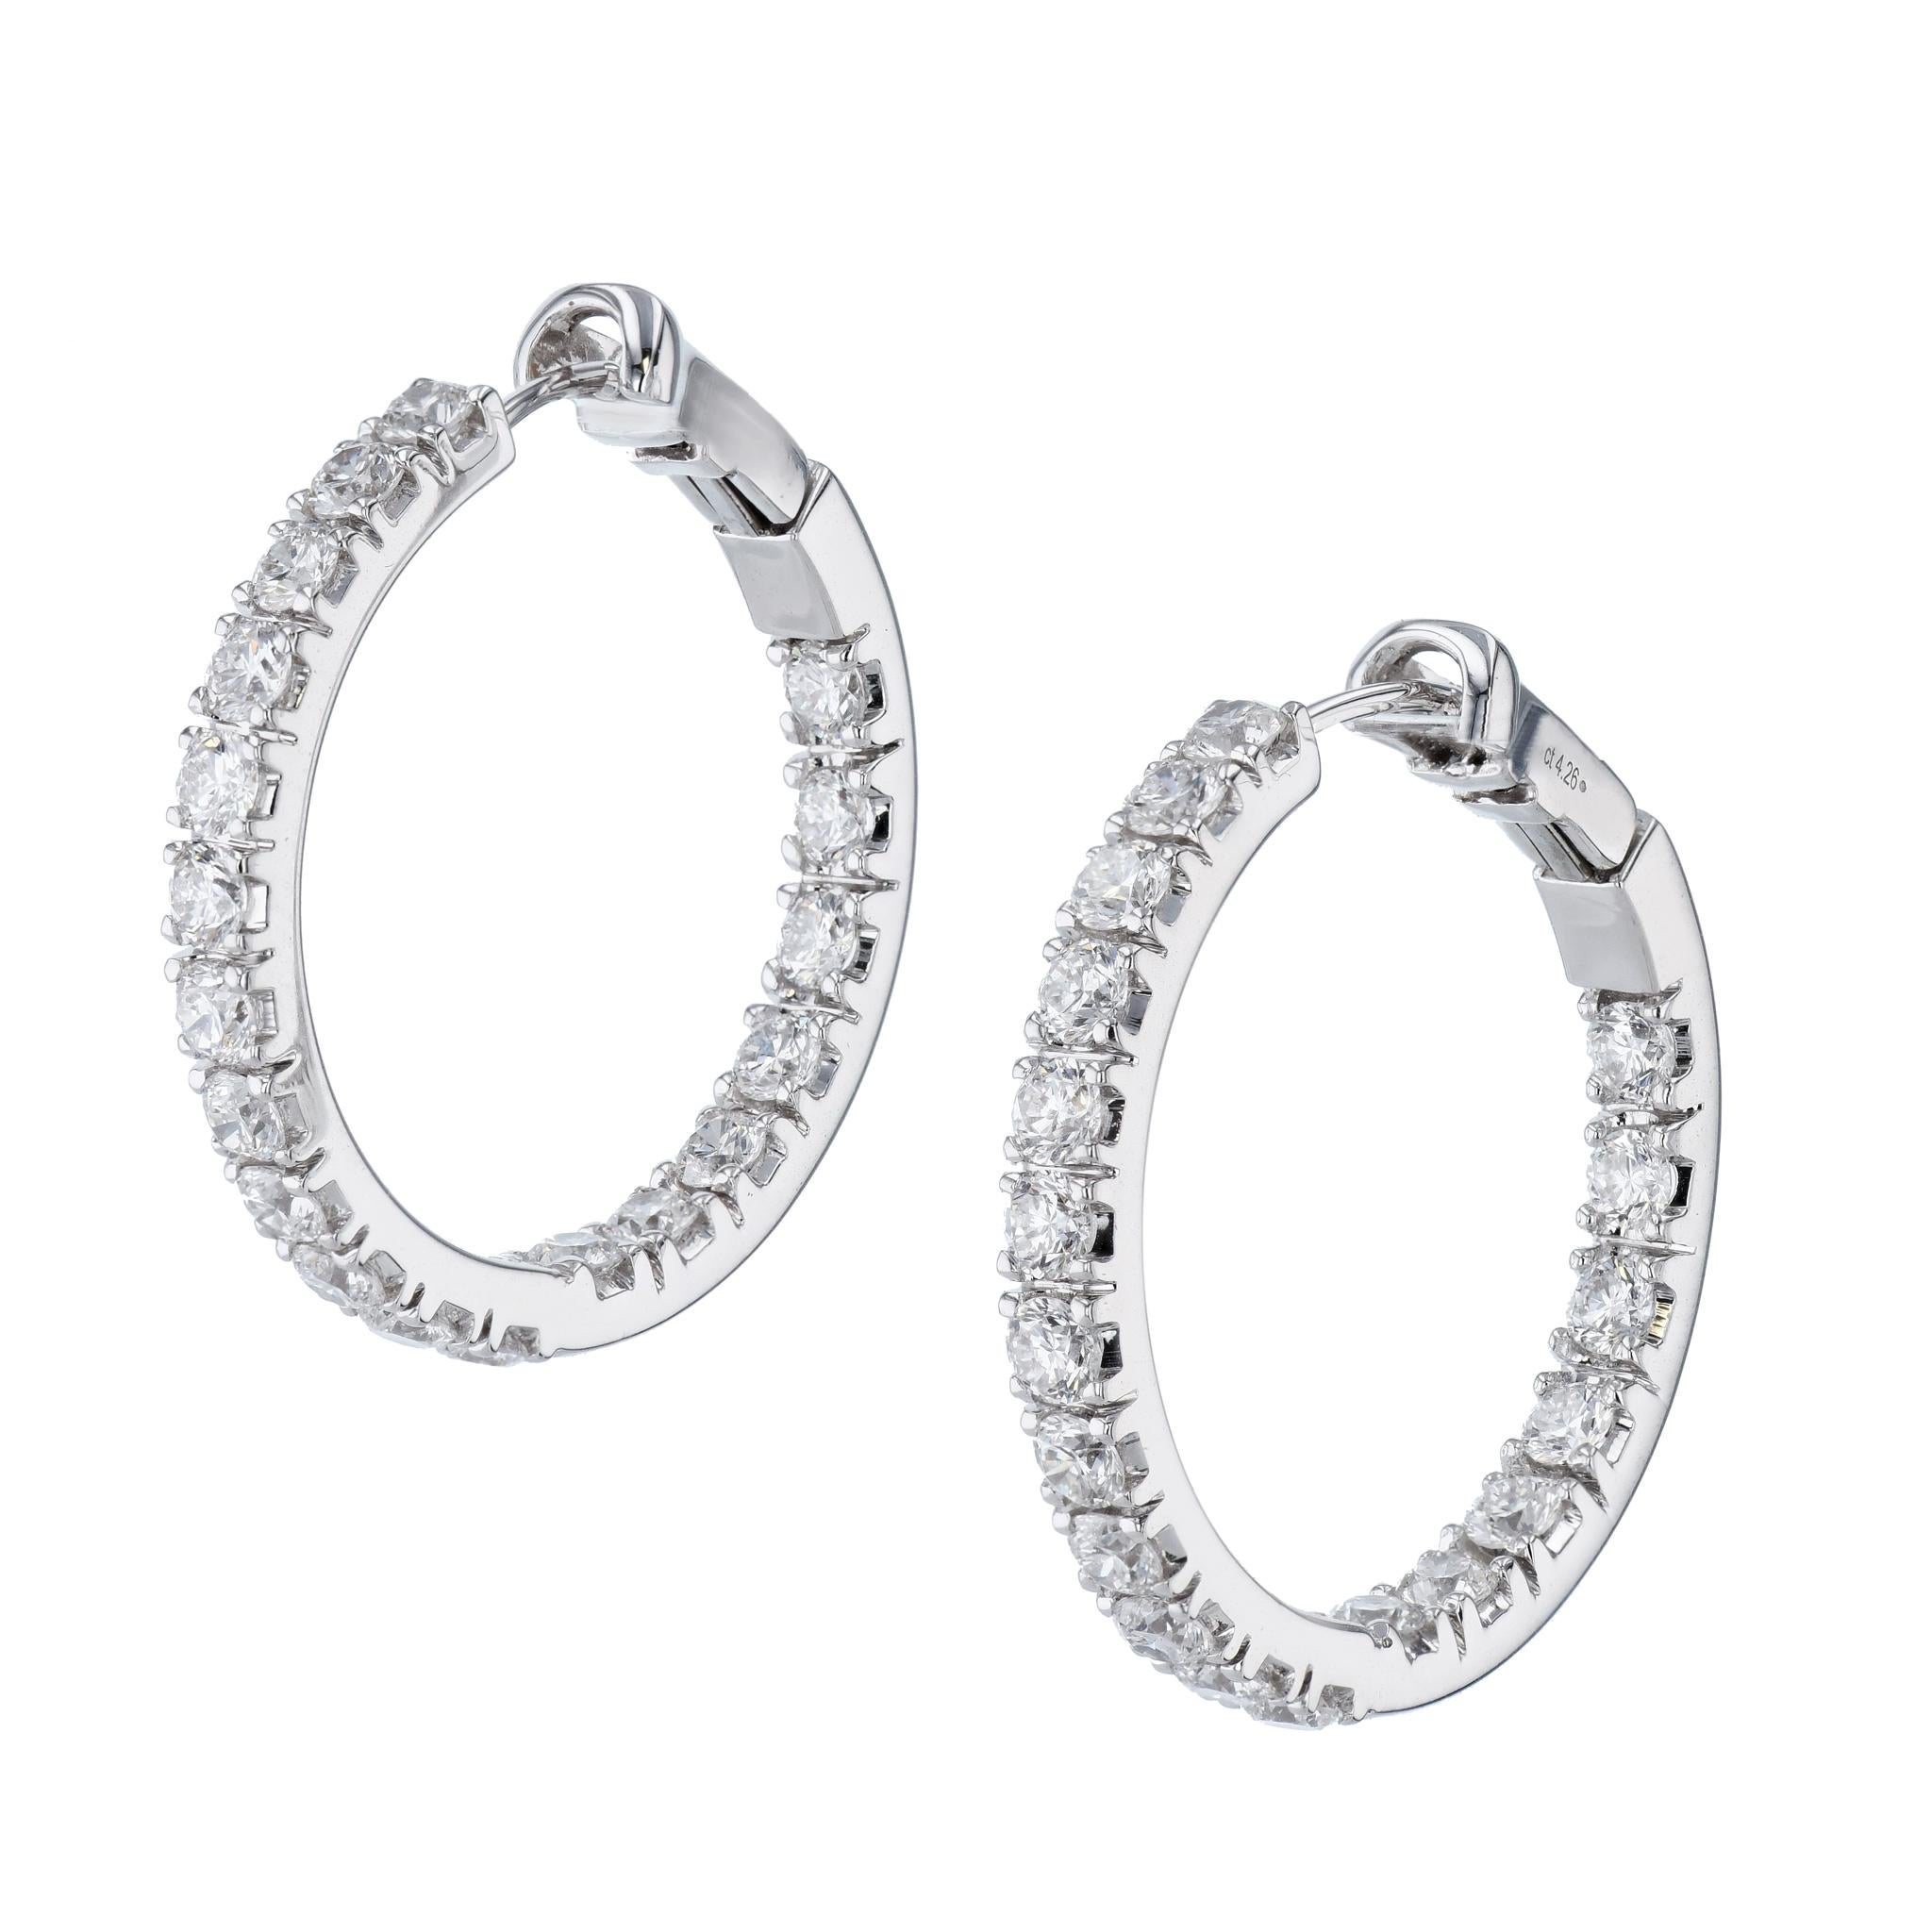 These fabulous hoop earrings have a total of 4.26 total carats of luxurious diamonds. 

They are crafted in 18 karat white gold.

These hoops measure 31 mm in diameter.

Their color is F and the clarity is SI.